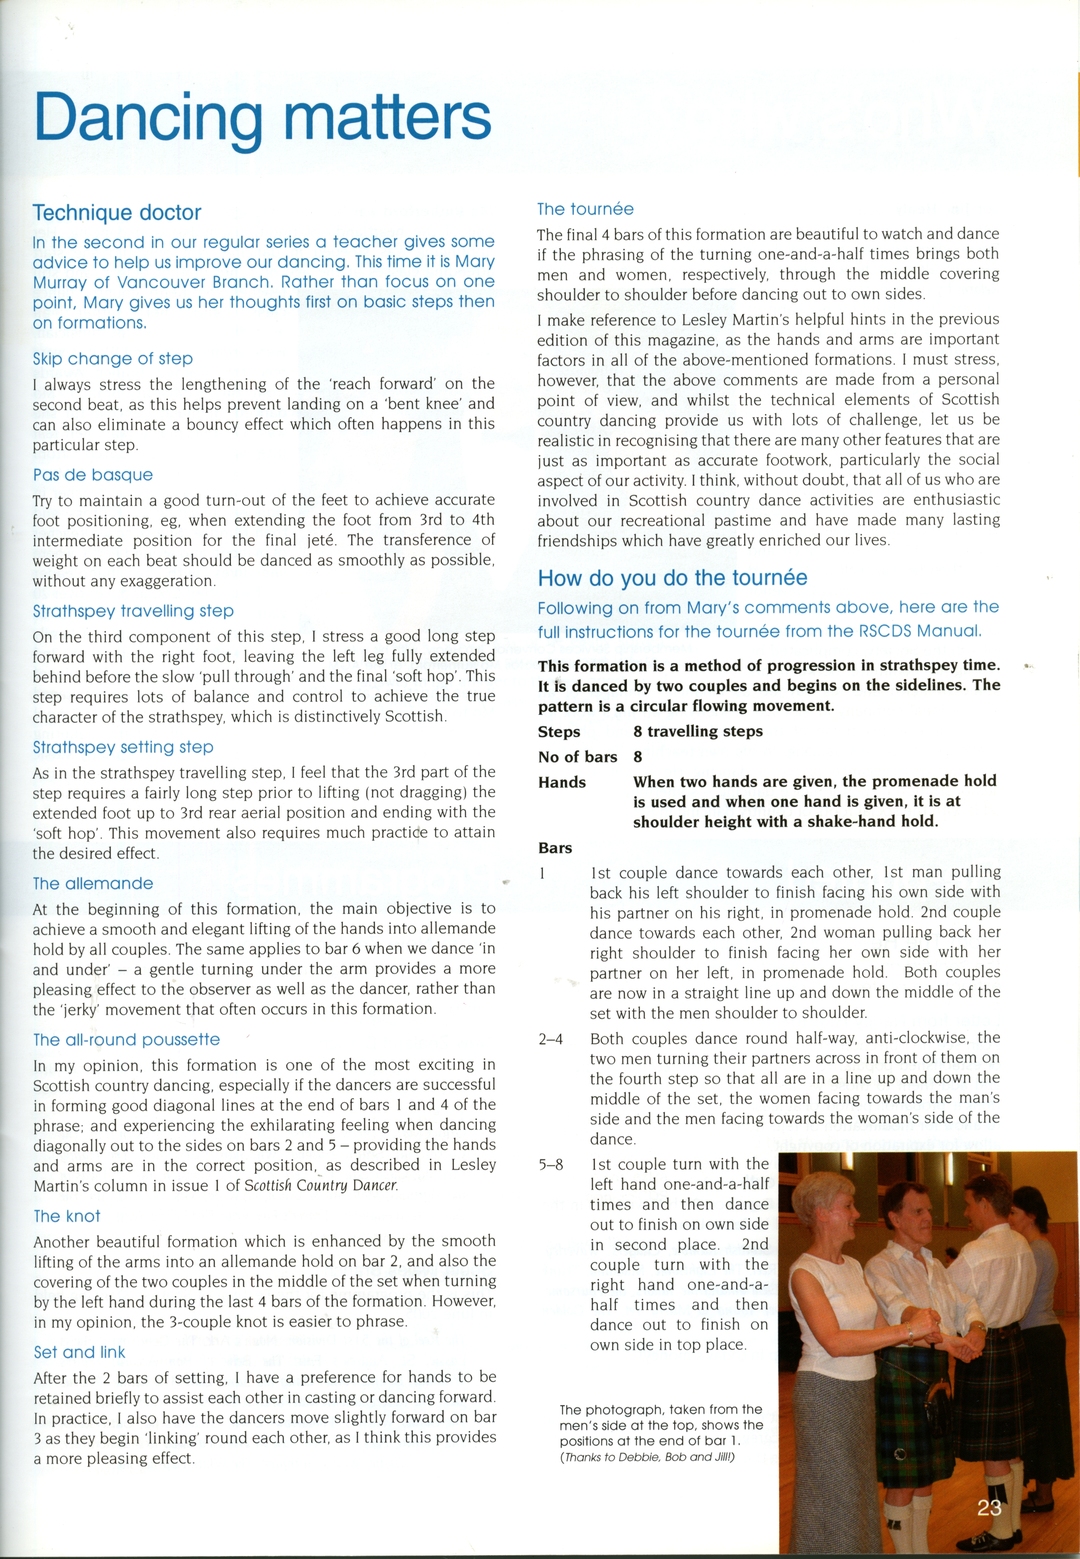 Article from: Scottish Country Dancer Issue 2 April 2006